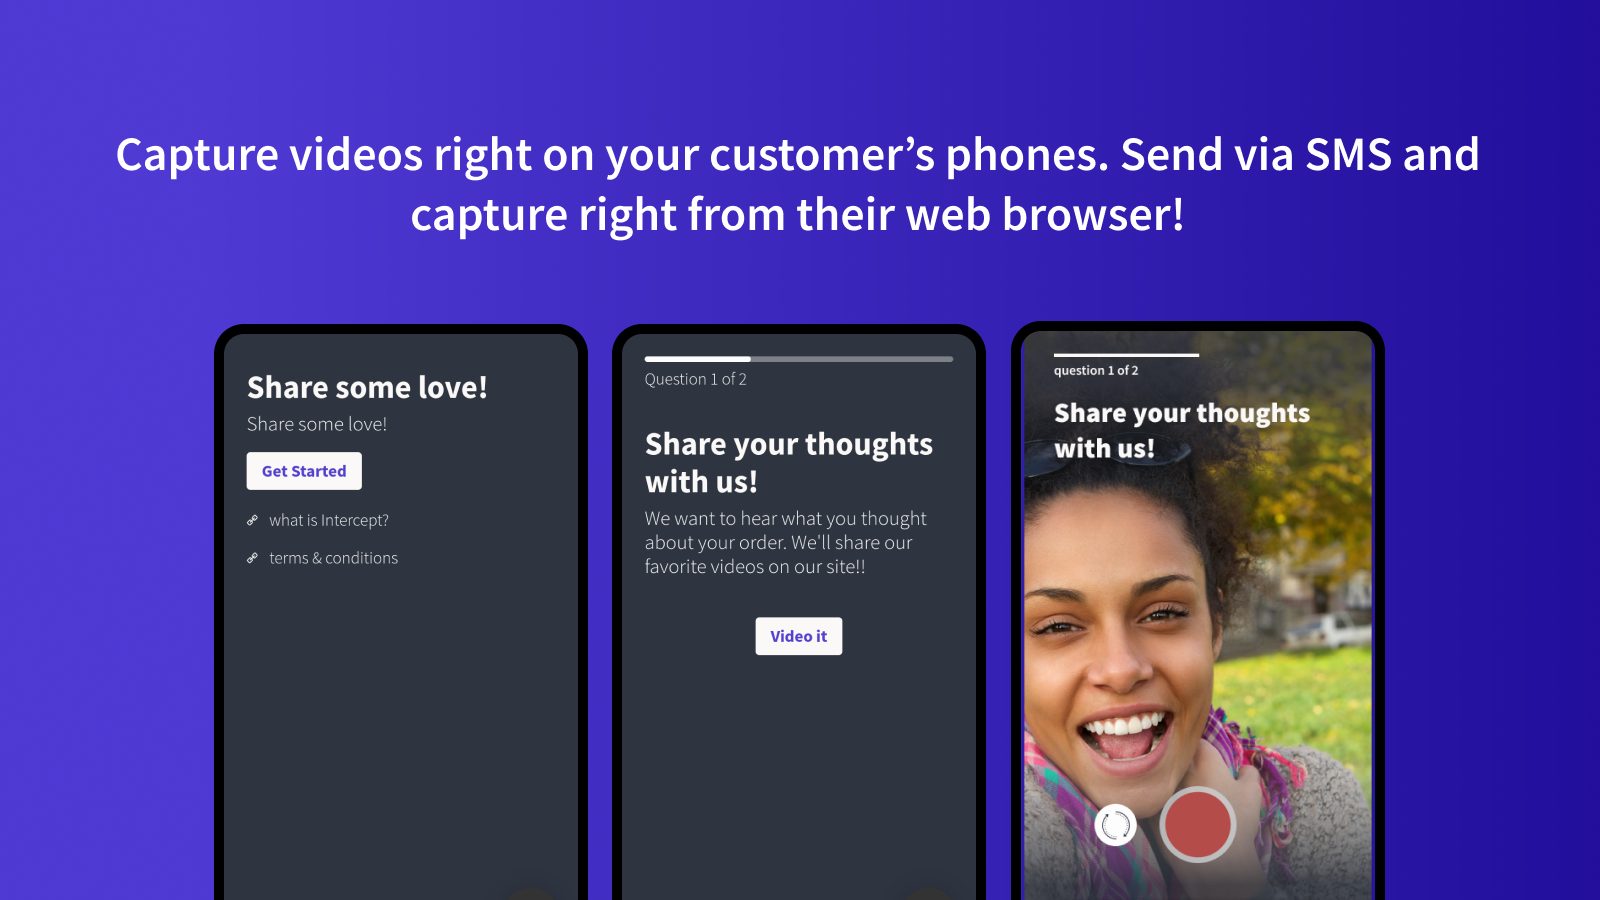 Send SMS to capture videos on your customer's phones